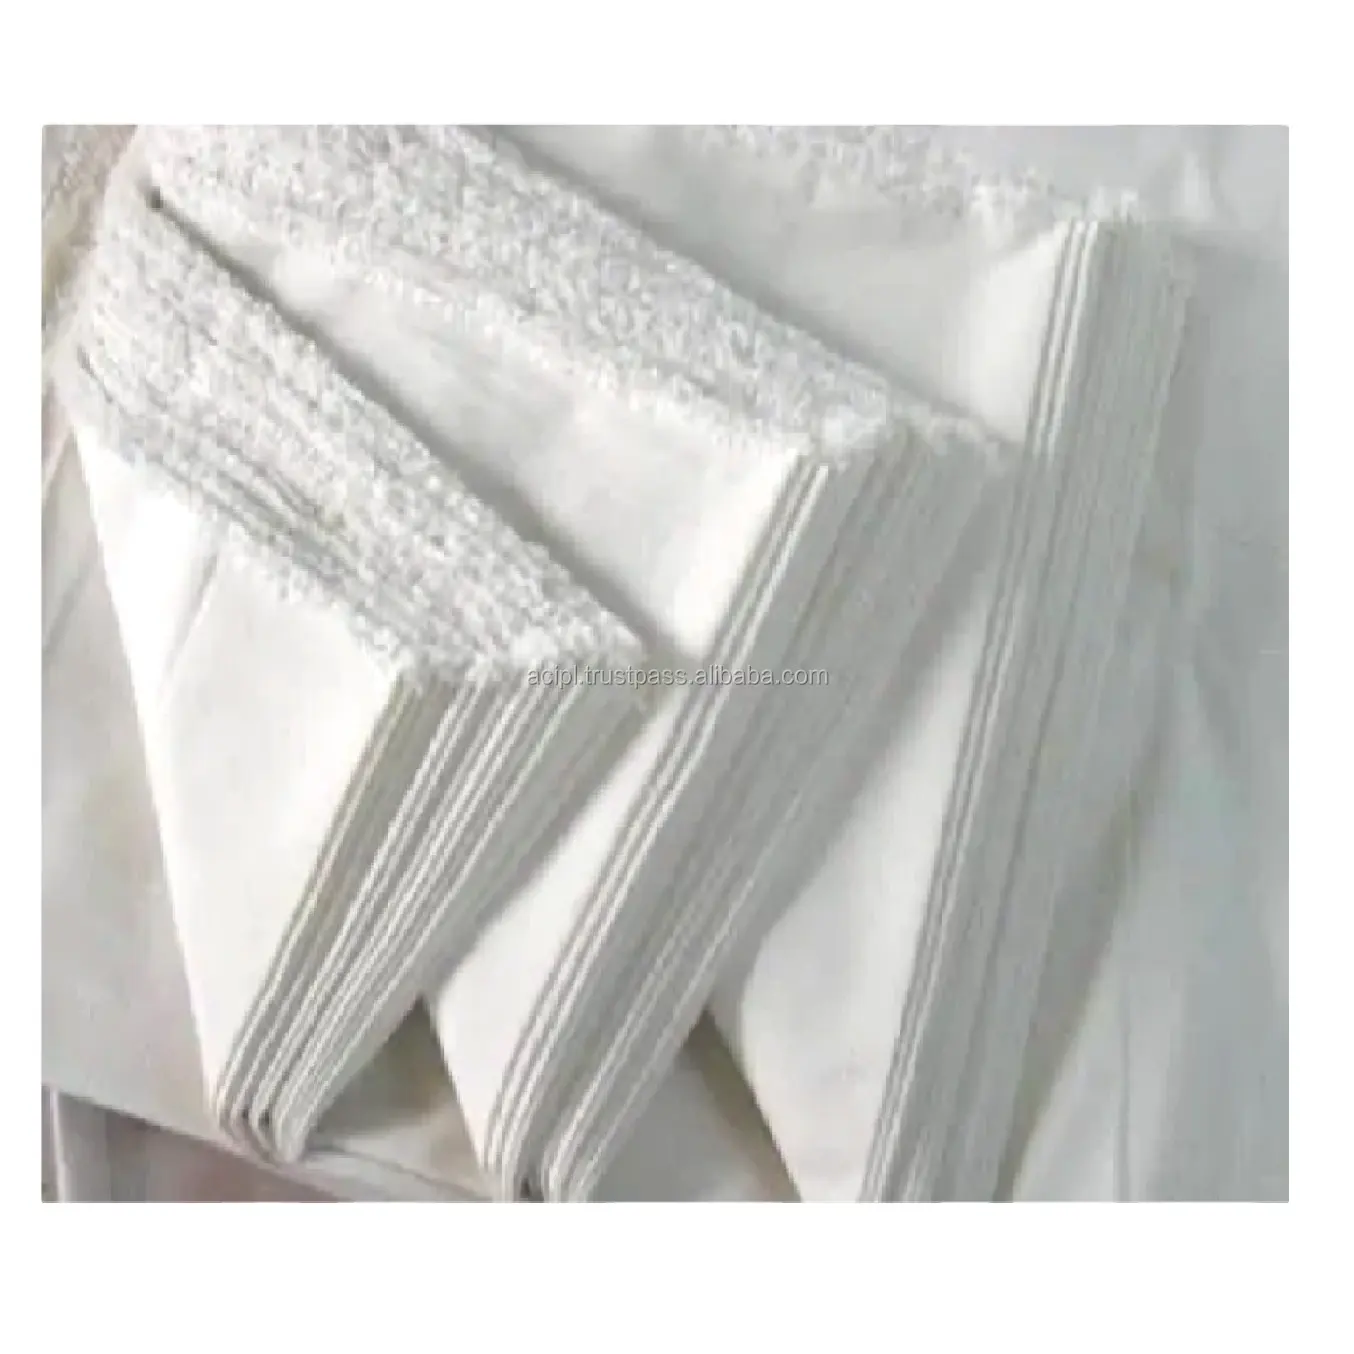 Premium Quality Polyester Fabric with a smooth and shiny surface often used for formal garments available at bulk quantities